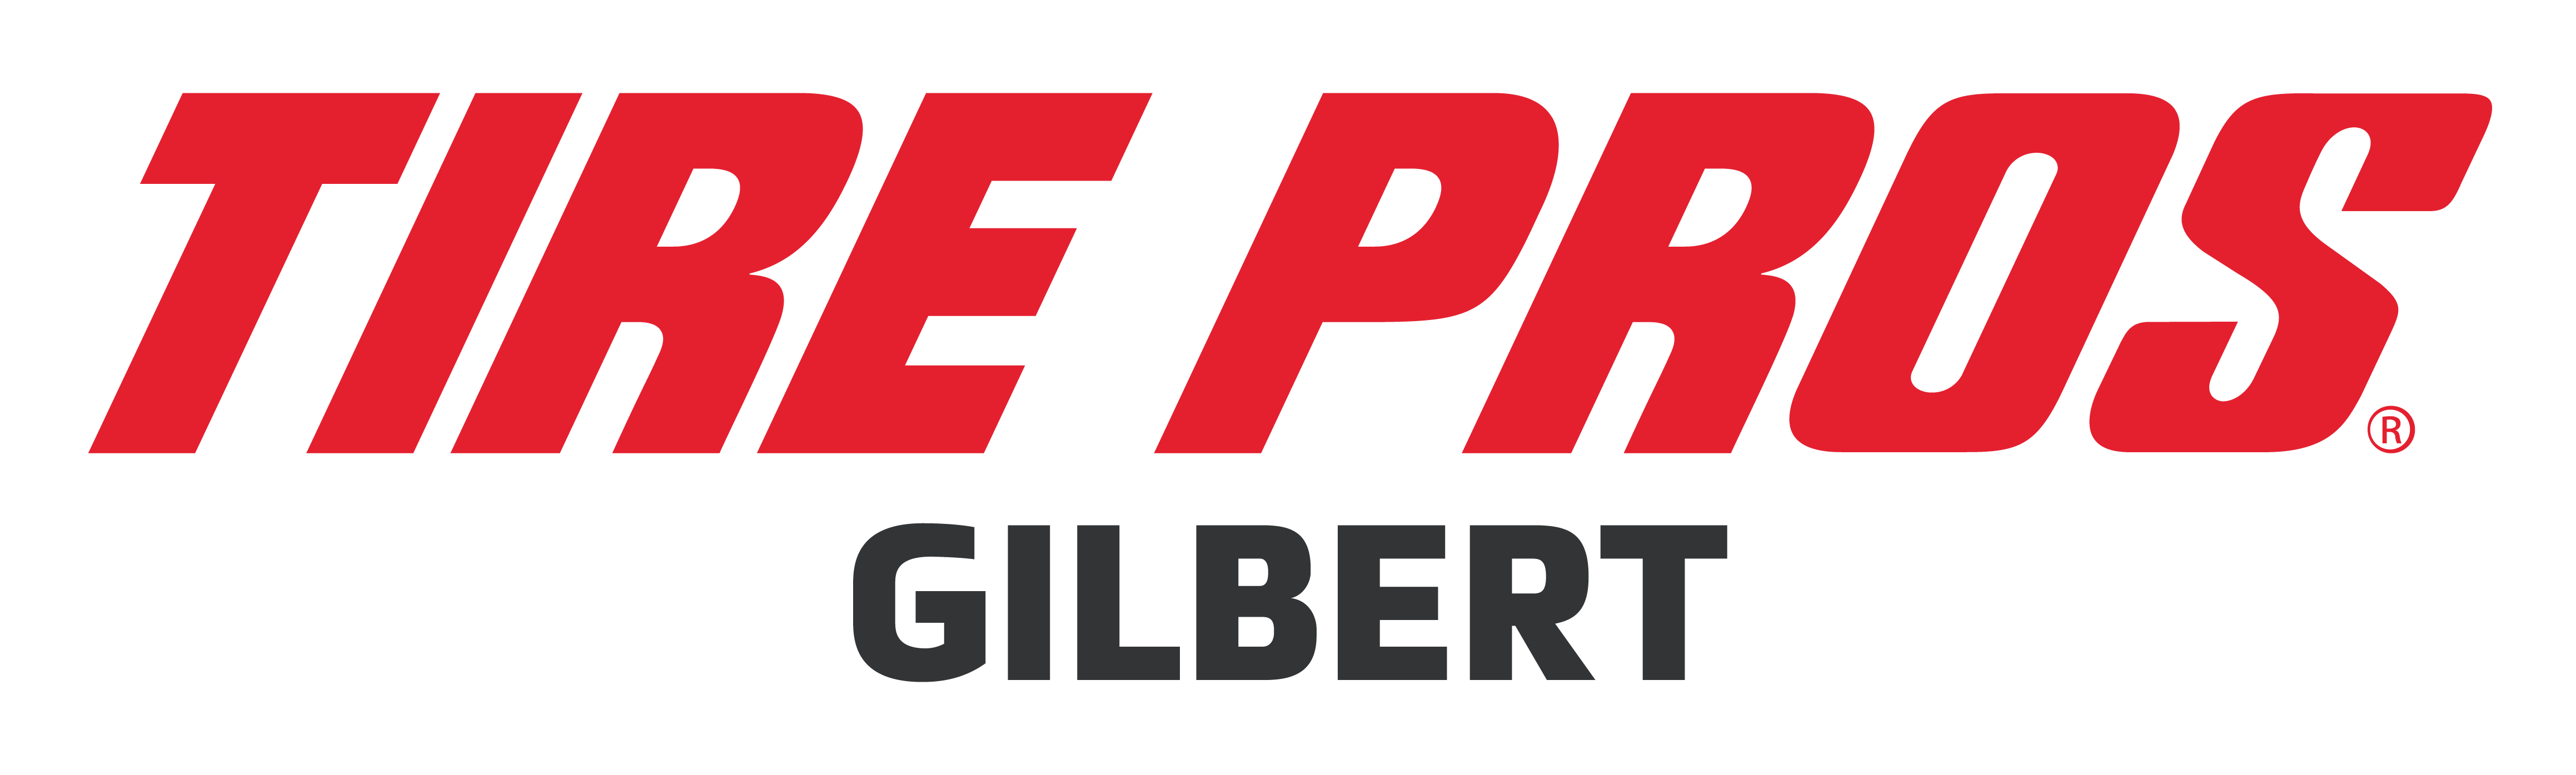 Welcome to Tire Pros Gilbert!